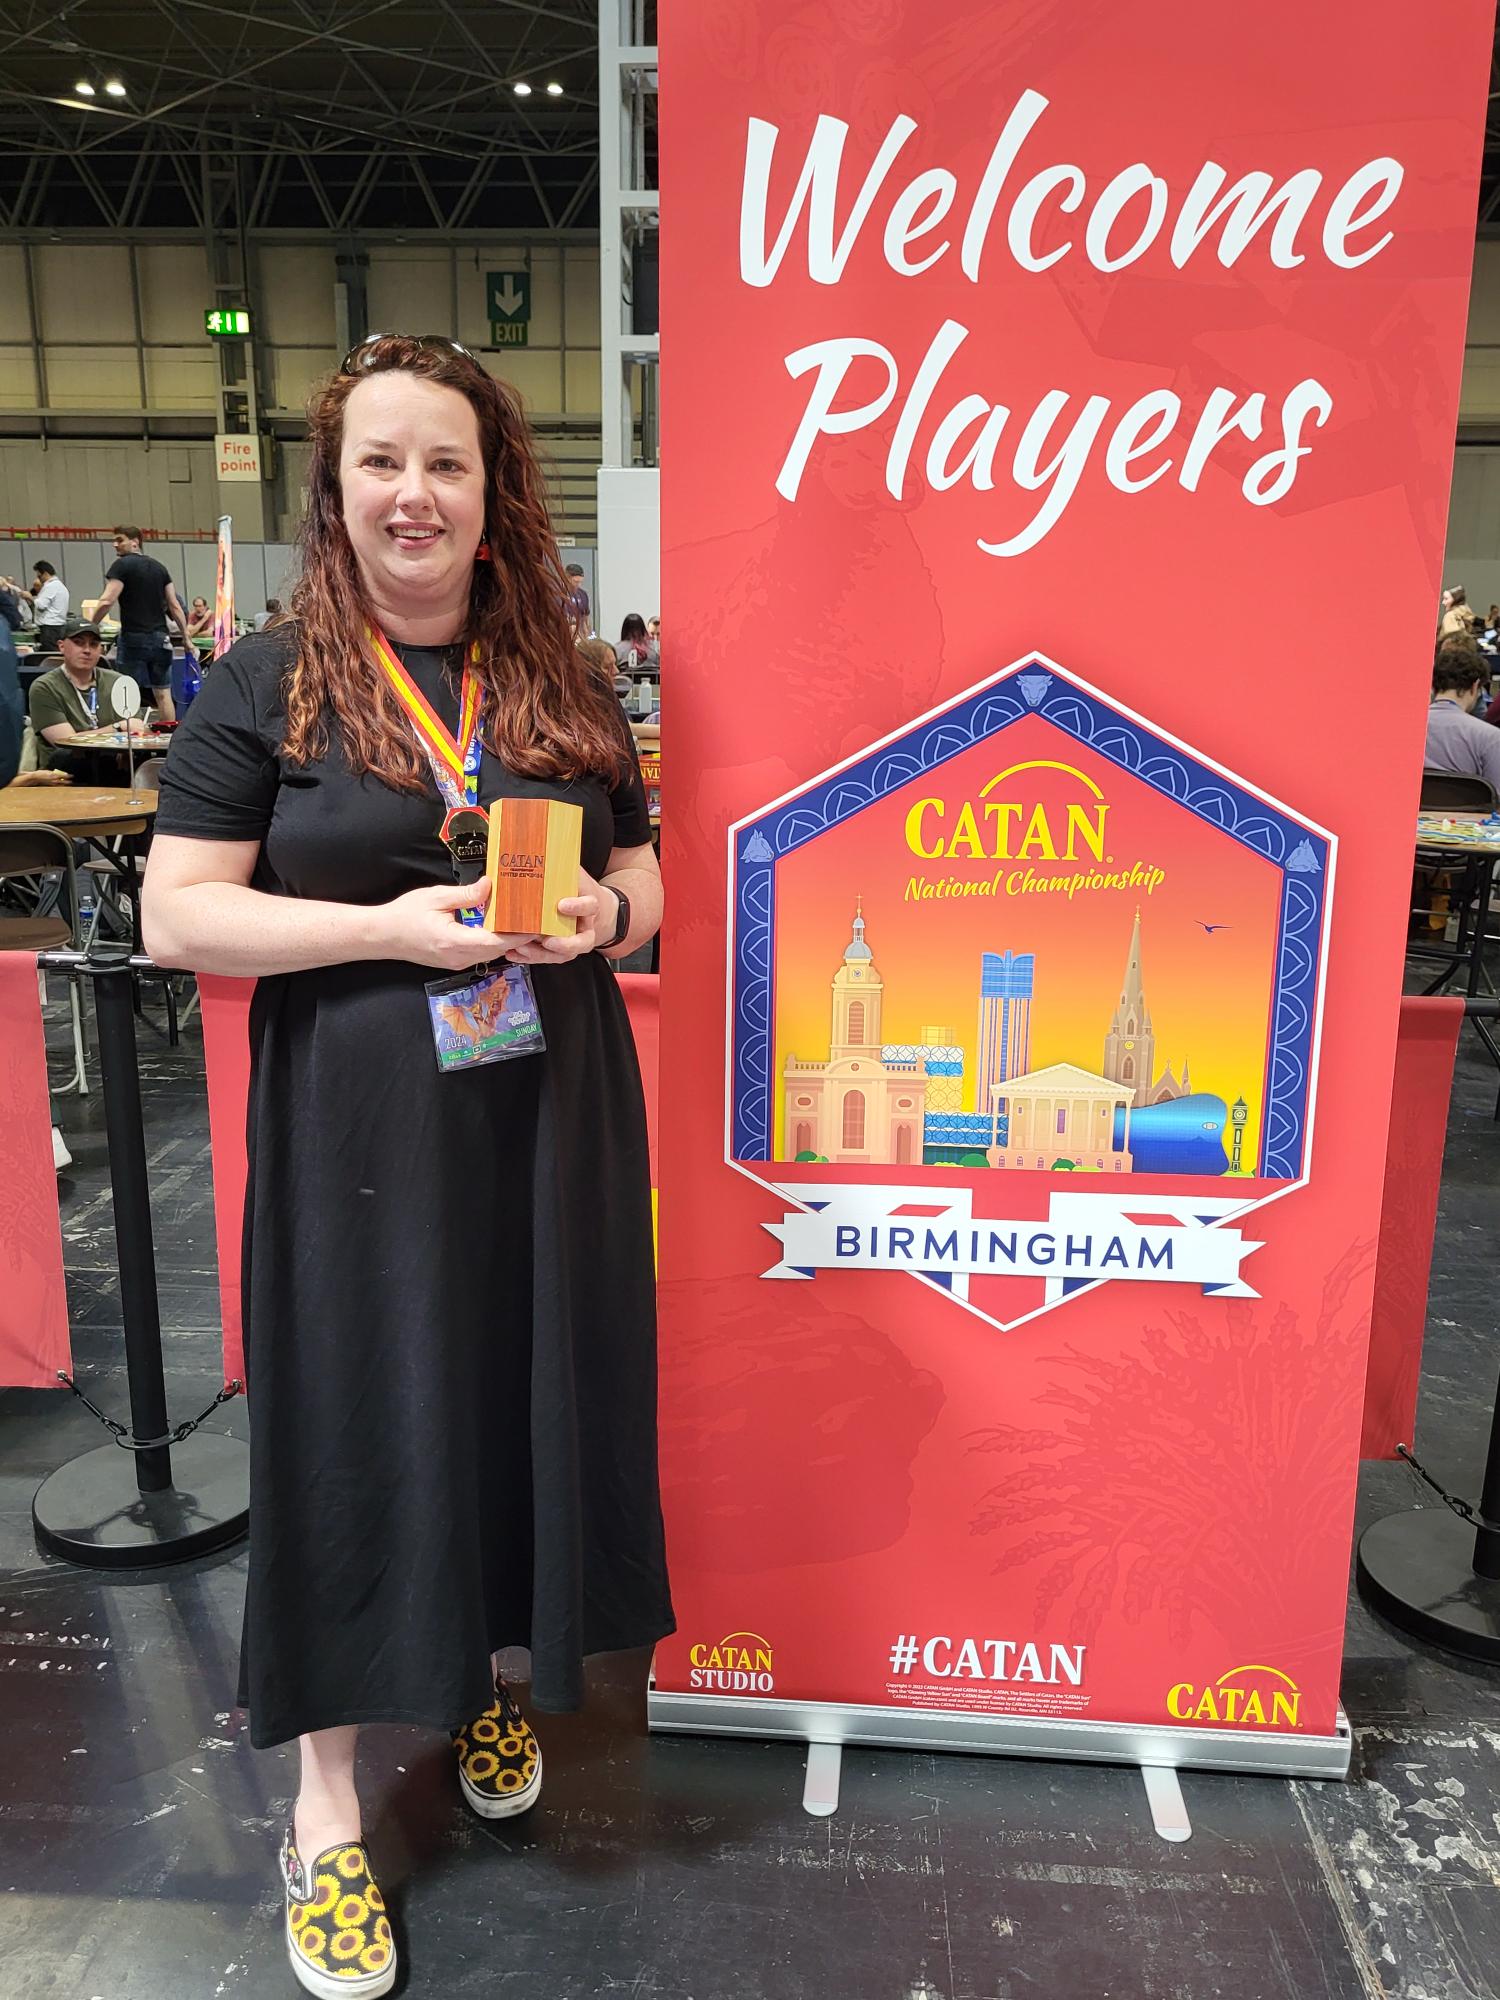 Jess Burns is pictured wearing a black dress and holding a small wooden trophy. She's standing in a expo hall next to a red banner that says CATAN Championship Birmingham. 